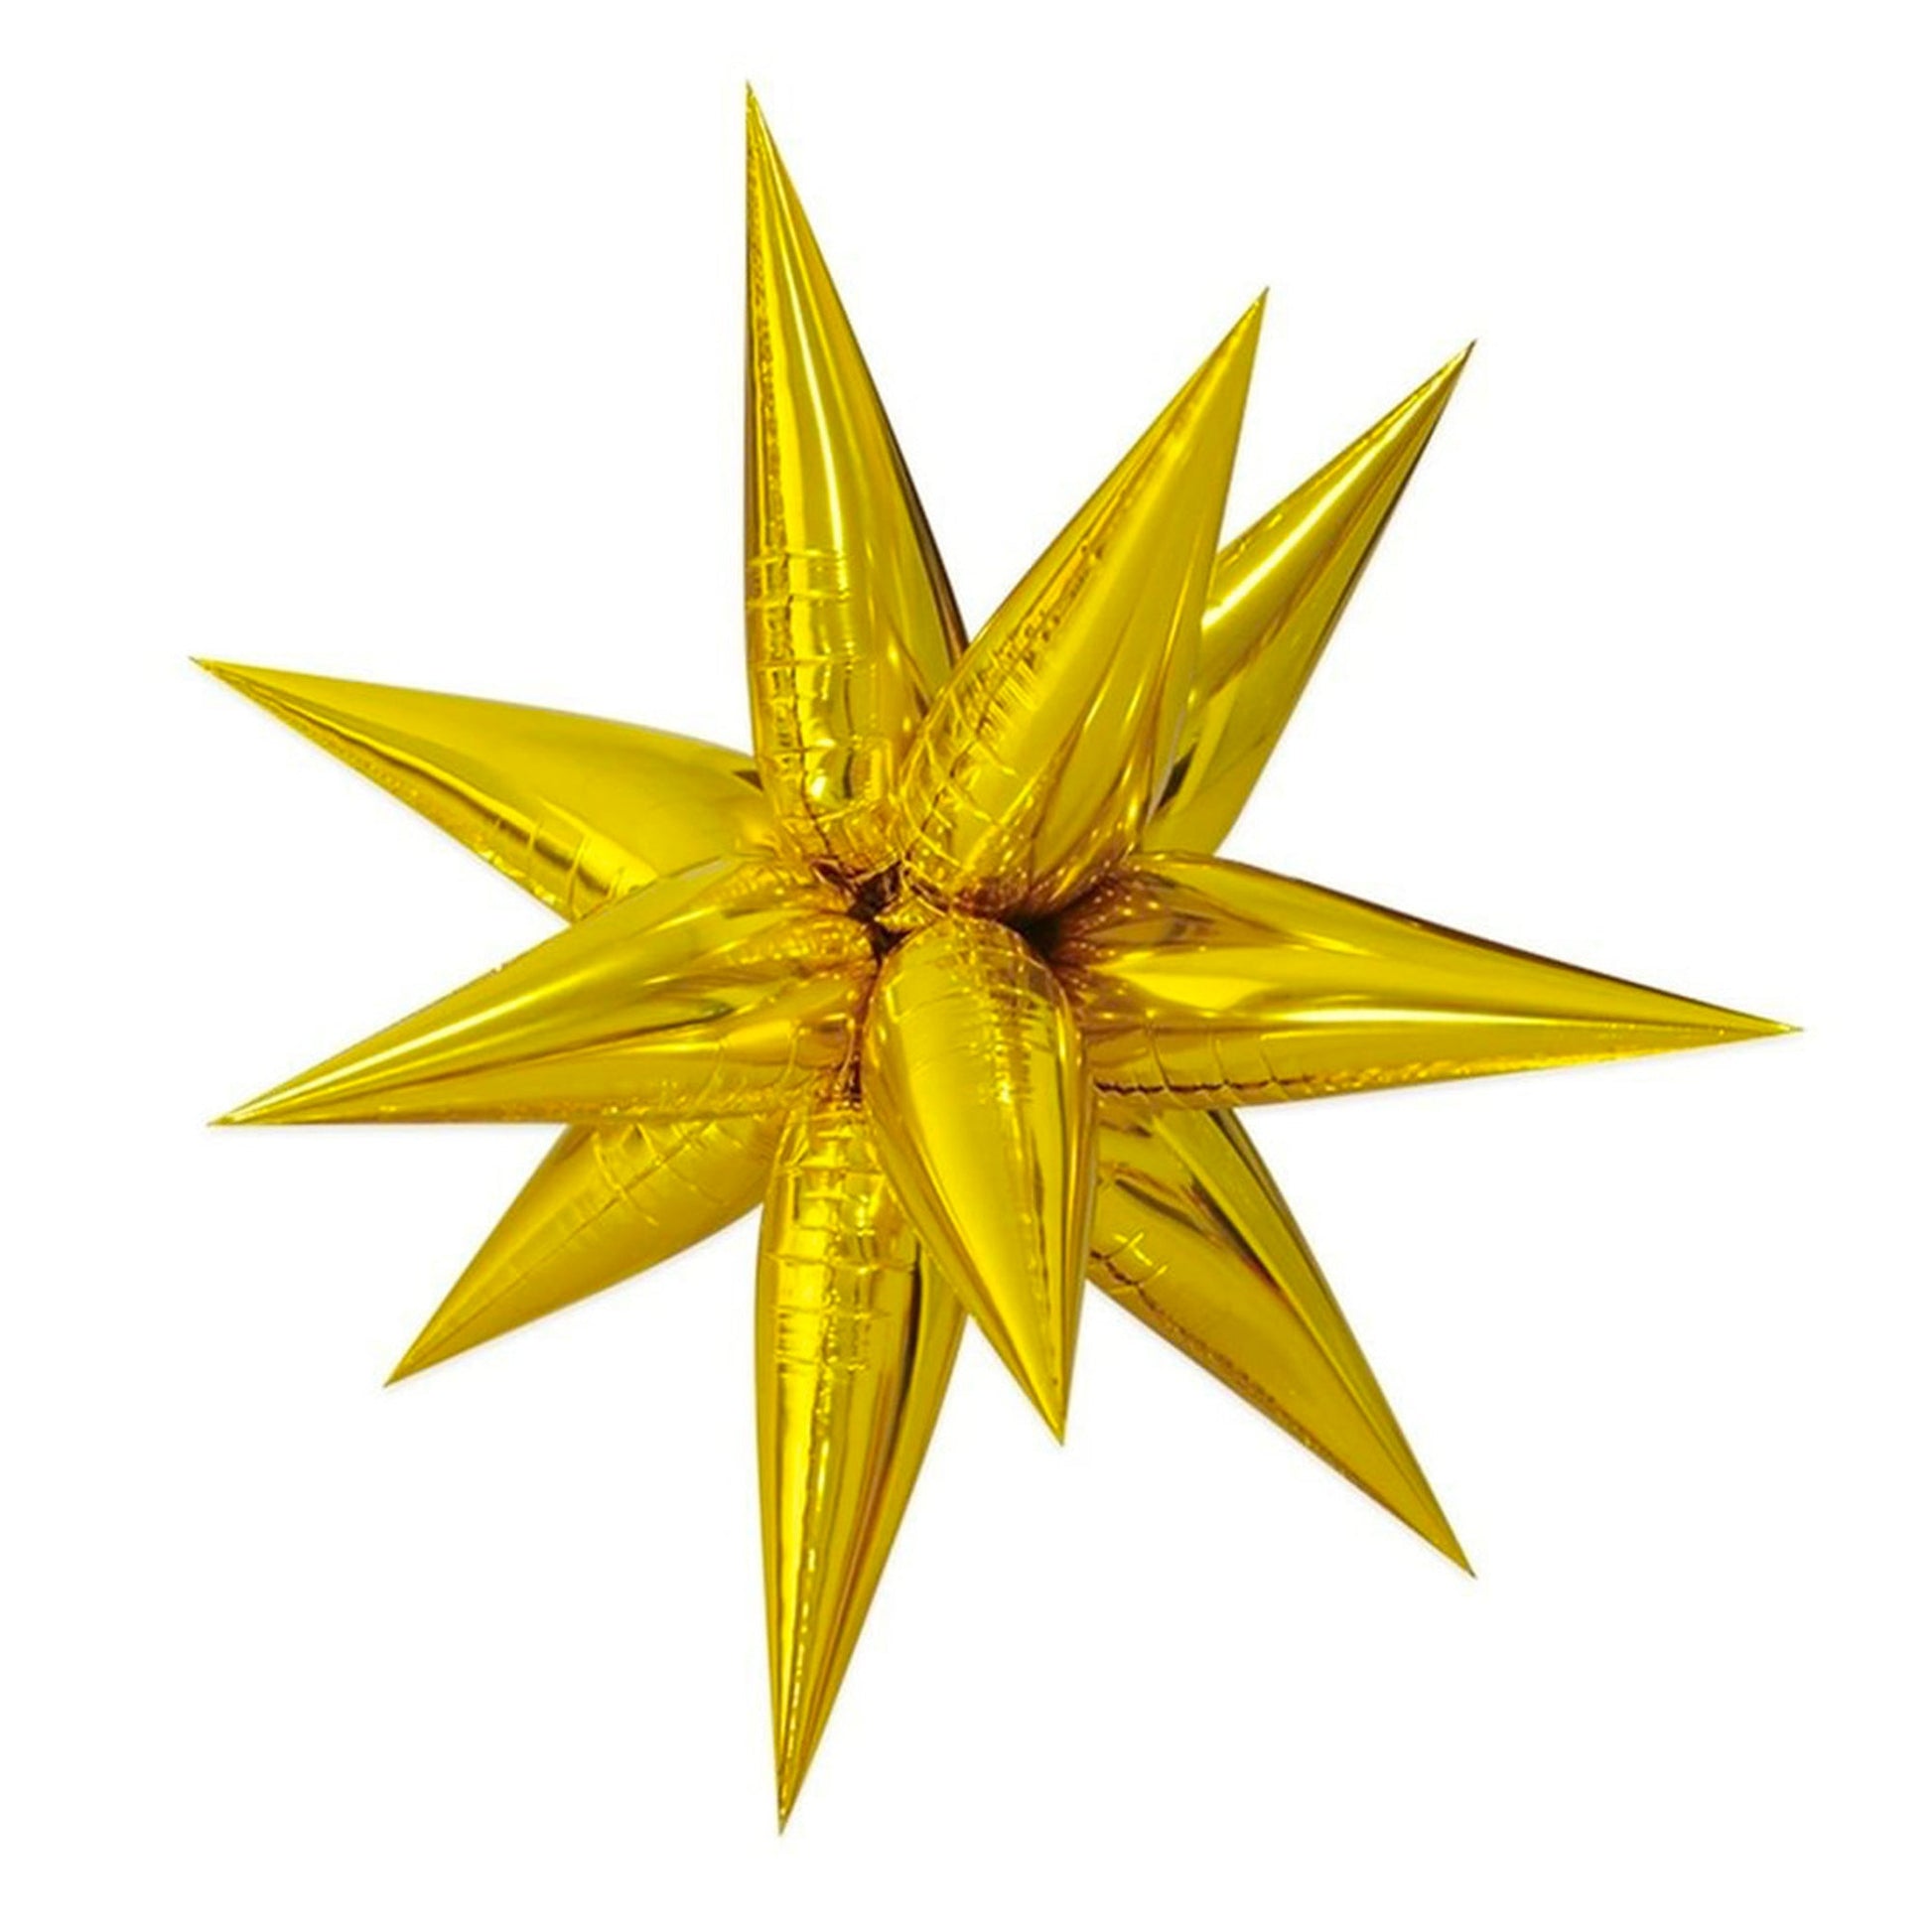 Gold Starburst Cluster Balloon (26 Inches) - Ellie's Party Supply